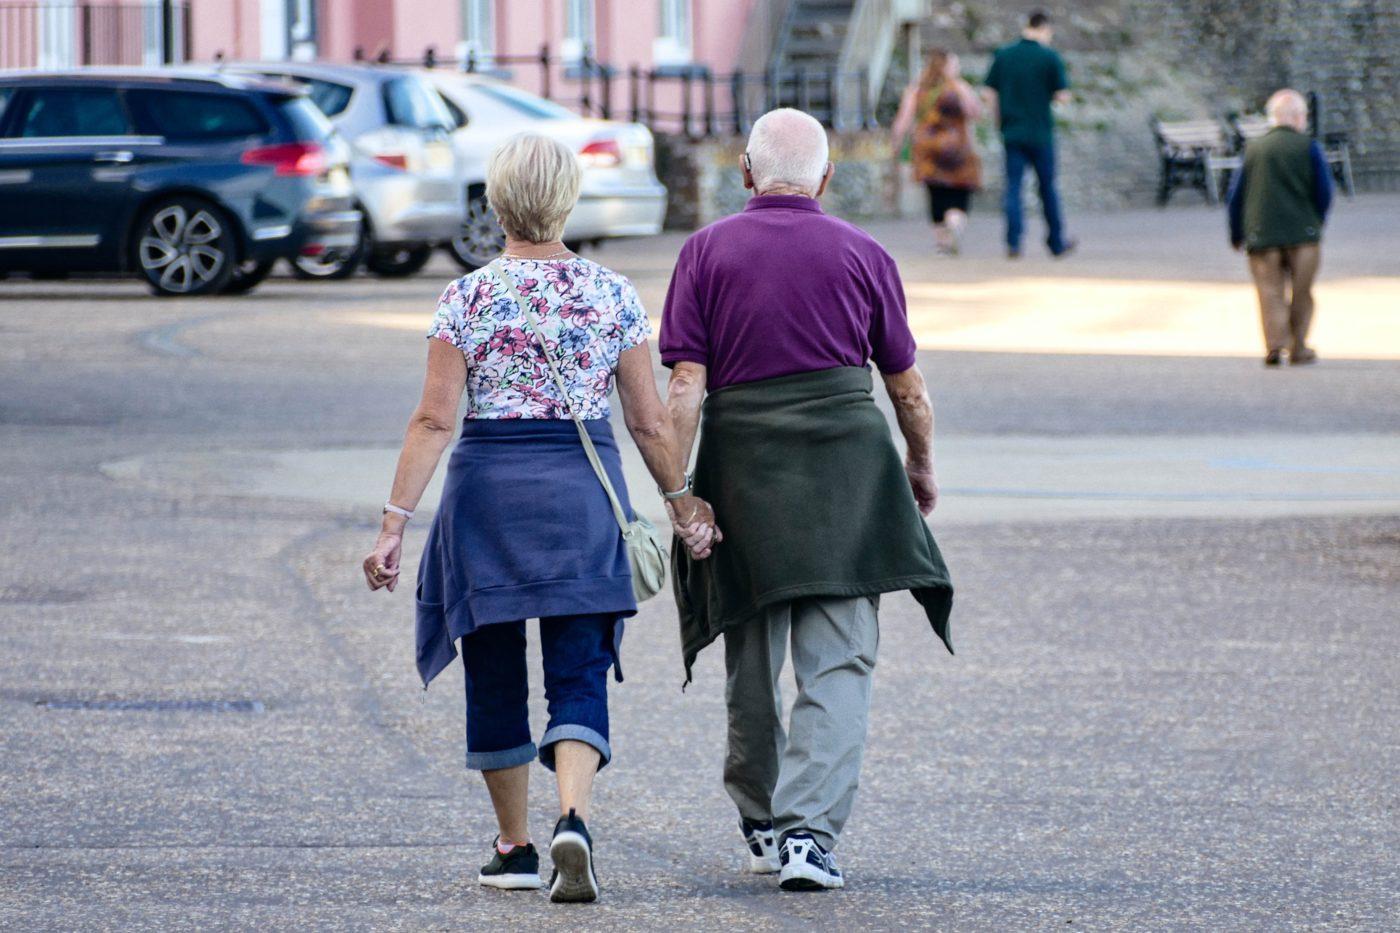 Ageing with HIV. In the photo two gray haired persons are walking on the street hand in hand.